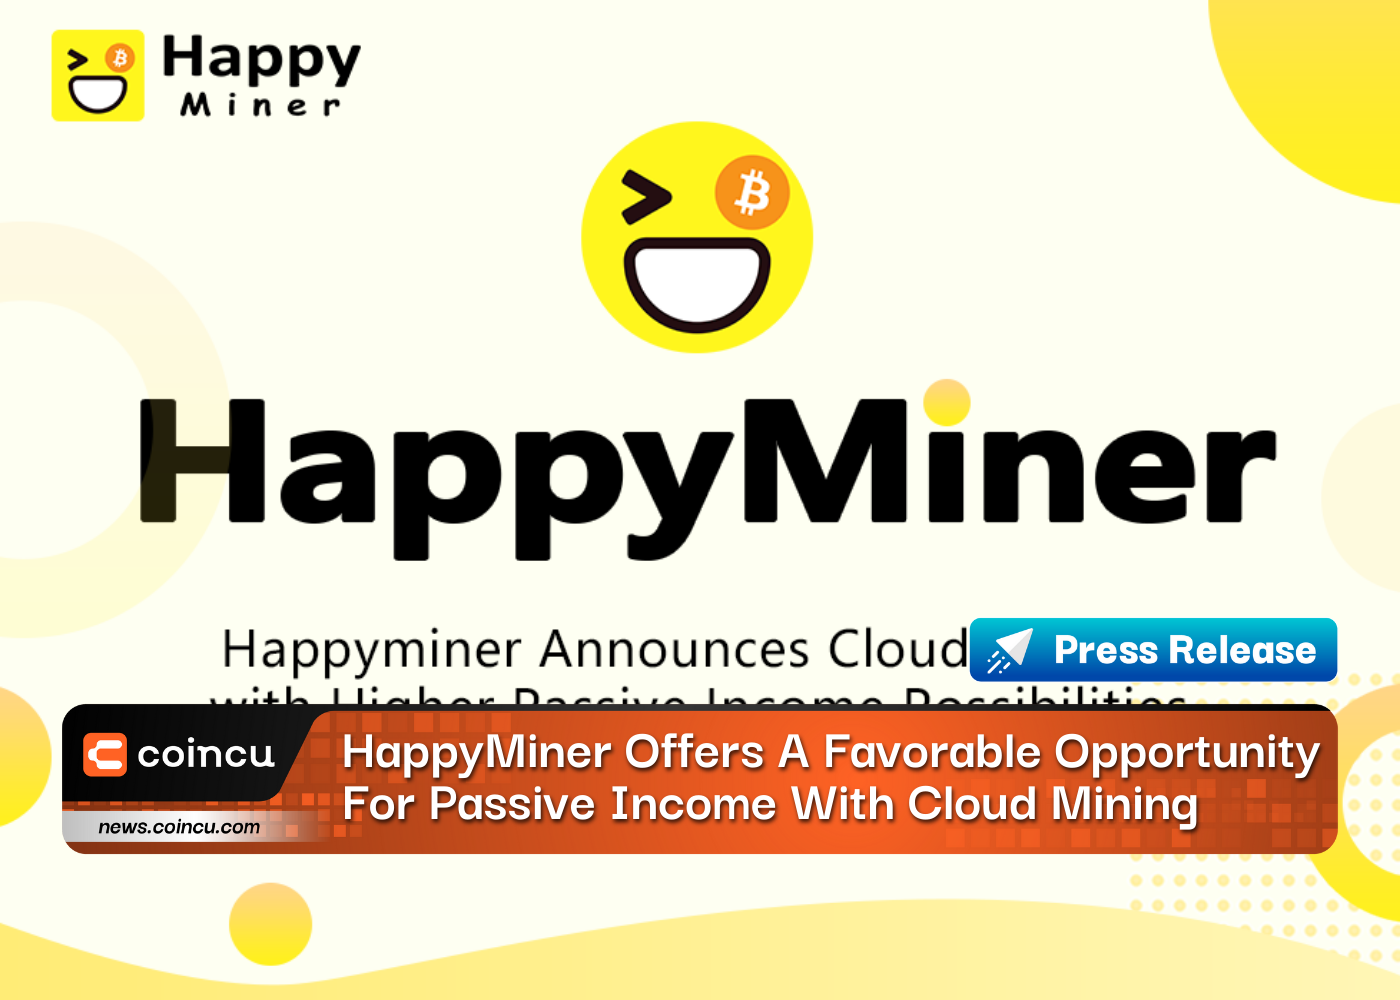 HappyMiner Offers A Favorable Opportunity